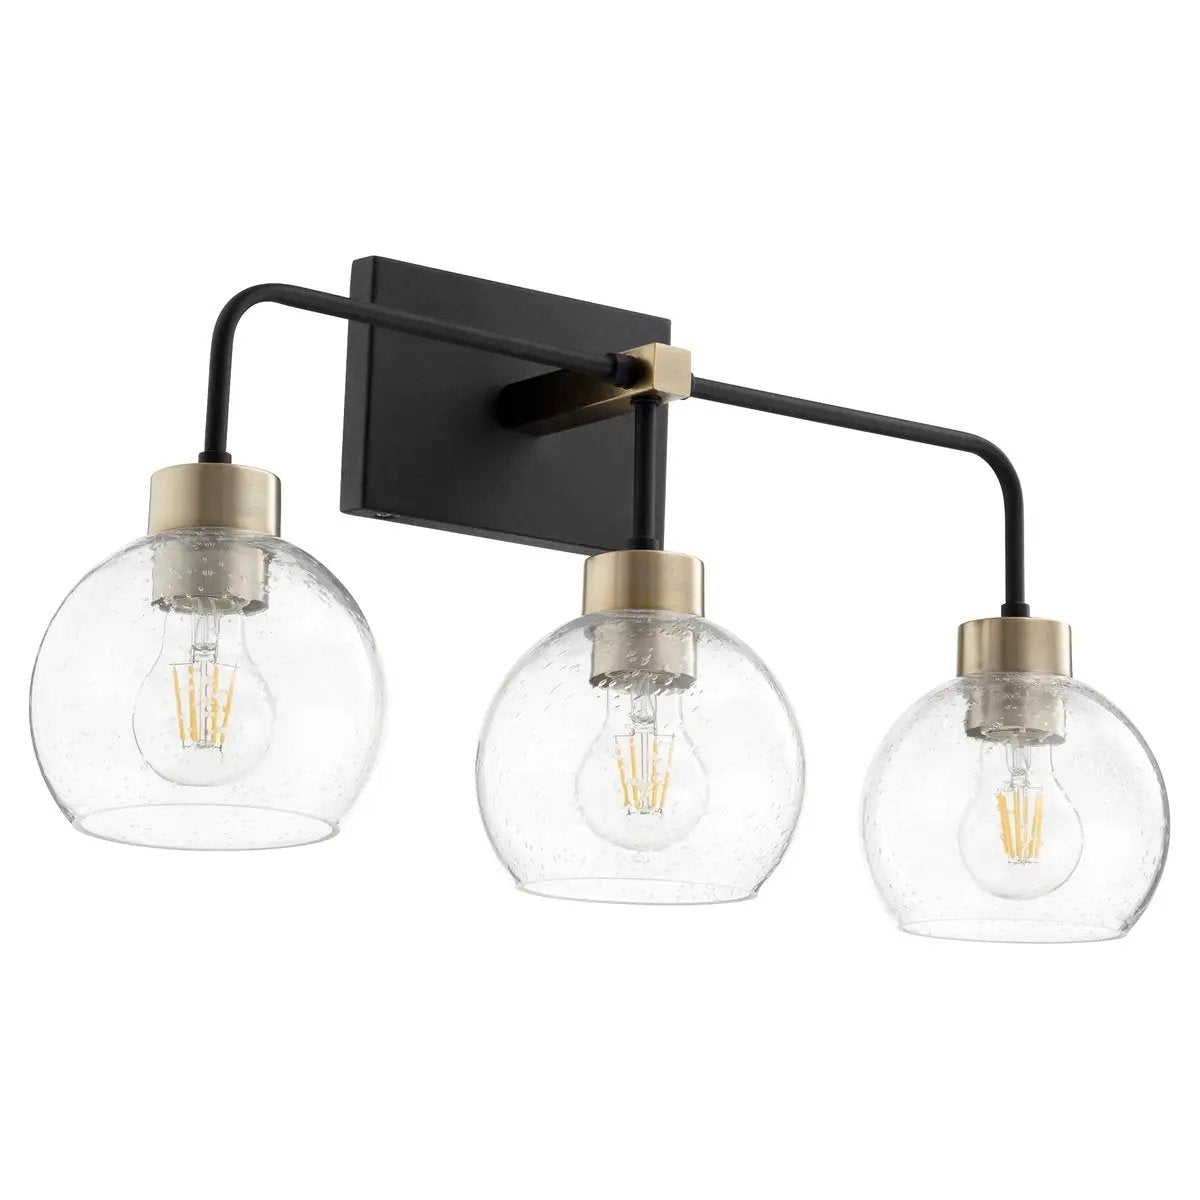 Contemporary vanity light with three clear glass globes and aged brass-noir finish, emitting ambient glow from eight candelabra light sources. Suitable for modern-industrial or minimalist-loft settings, both indoors and outdoors.